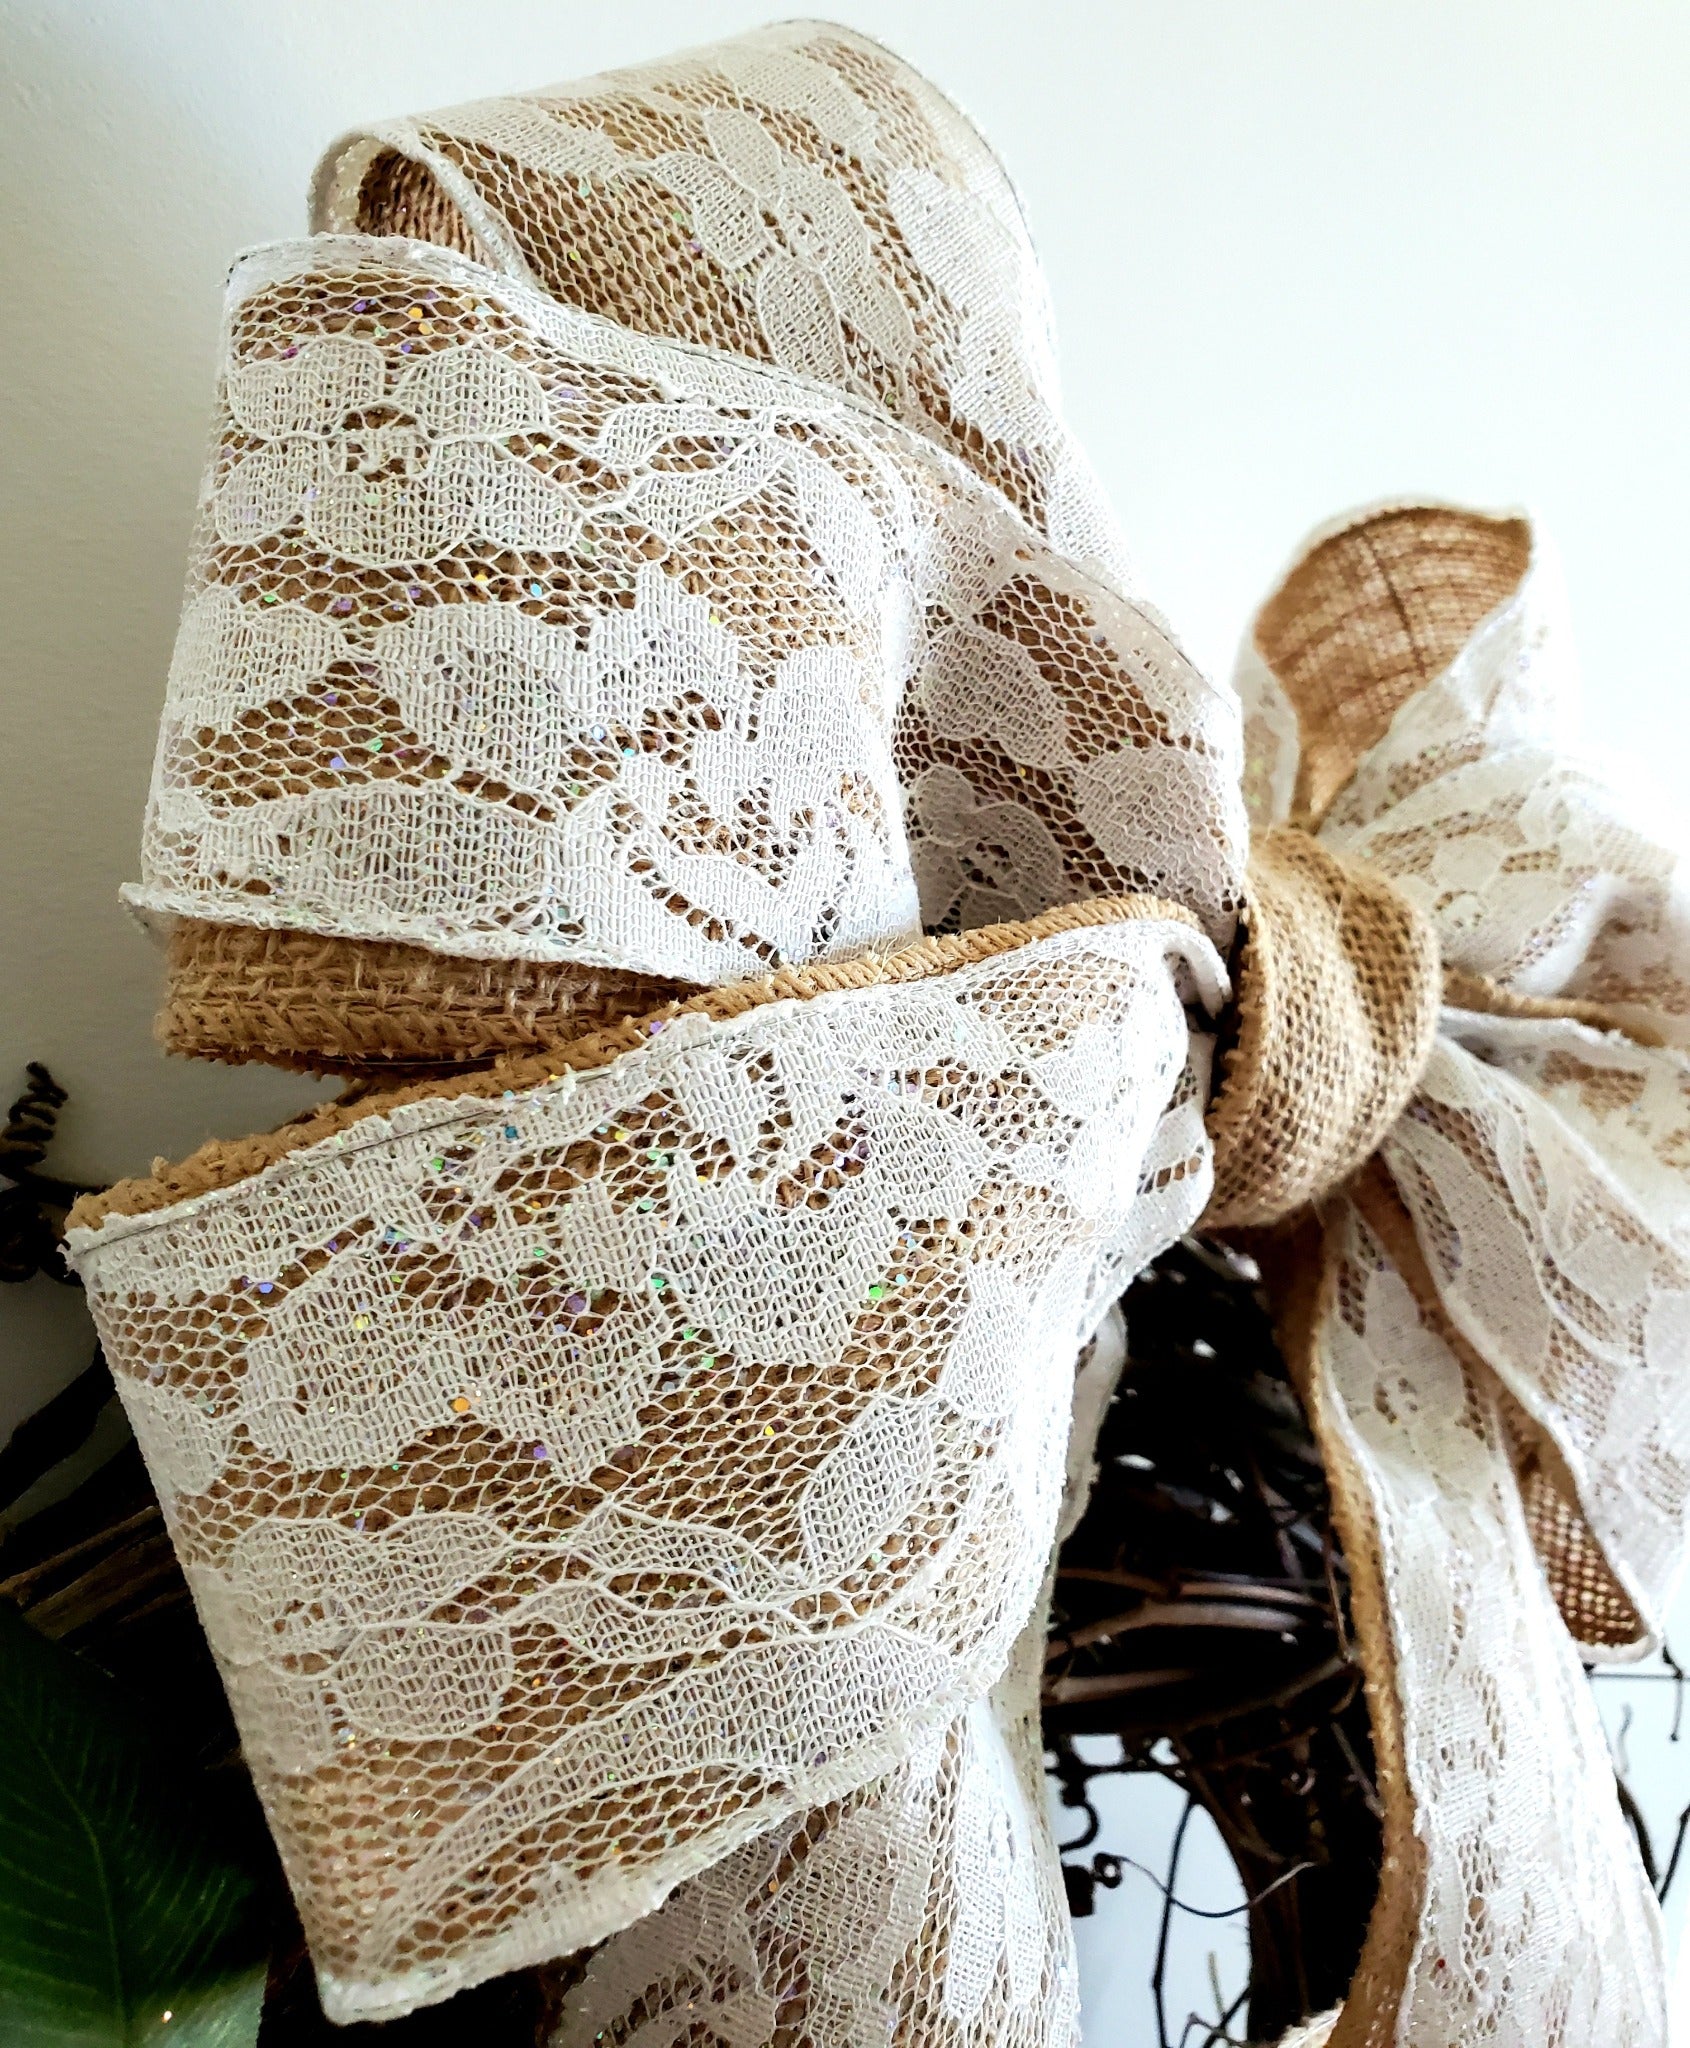 AIMUDI Natural Burlap Bows with Lace 4 Inch Handmade White Lace Jute Bows  Pre Tied Gift Bows for Crafts Burlap Bows for Christmas Tree Crafts Vintage